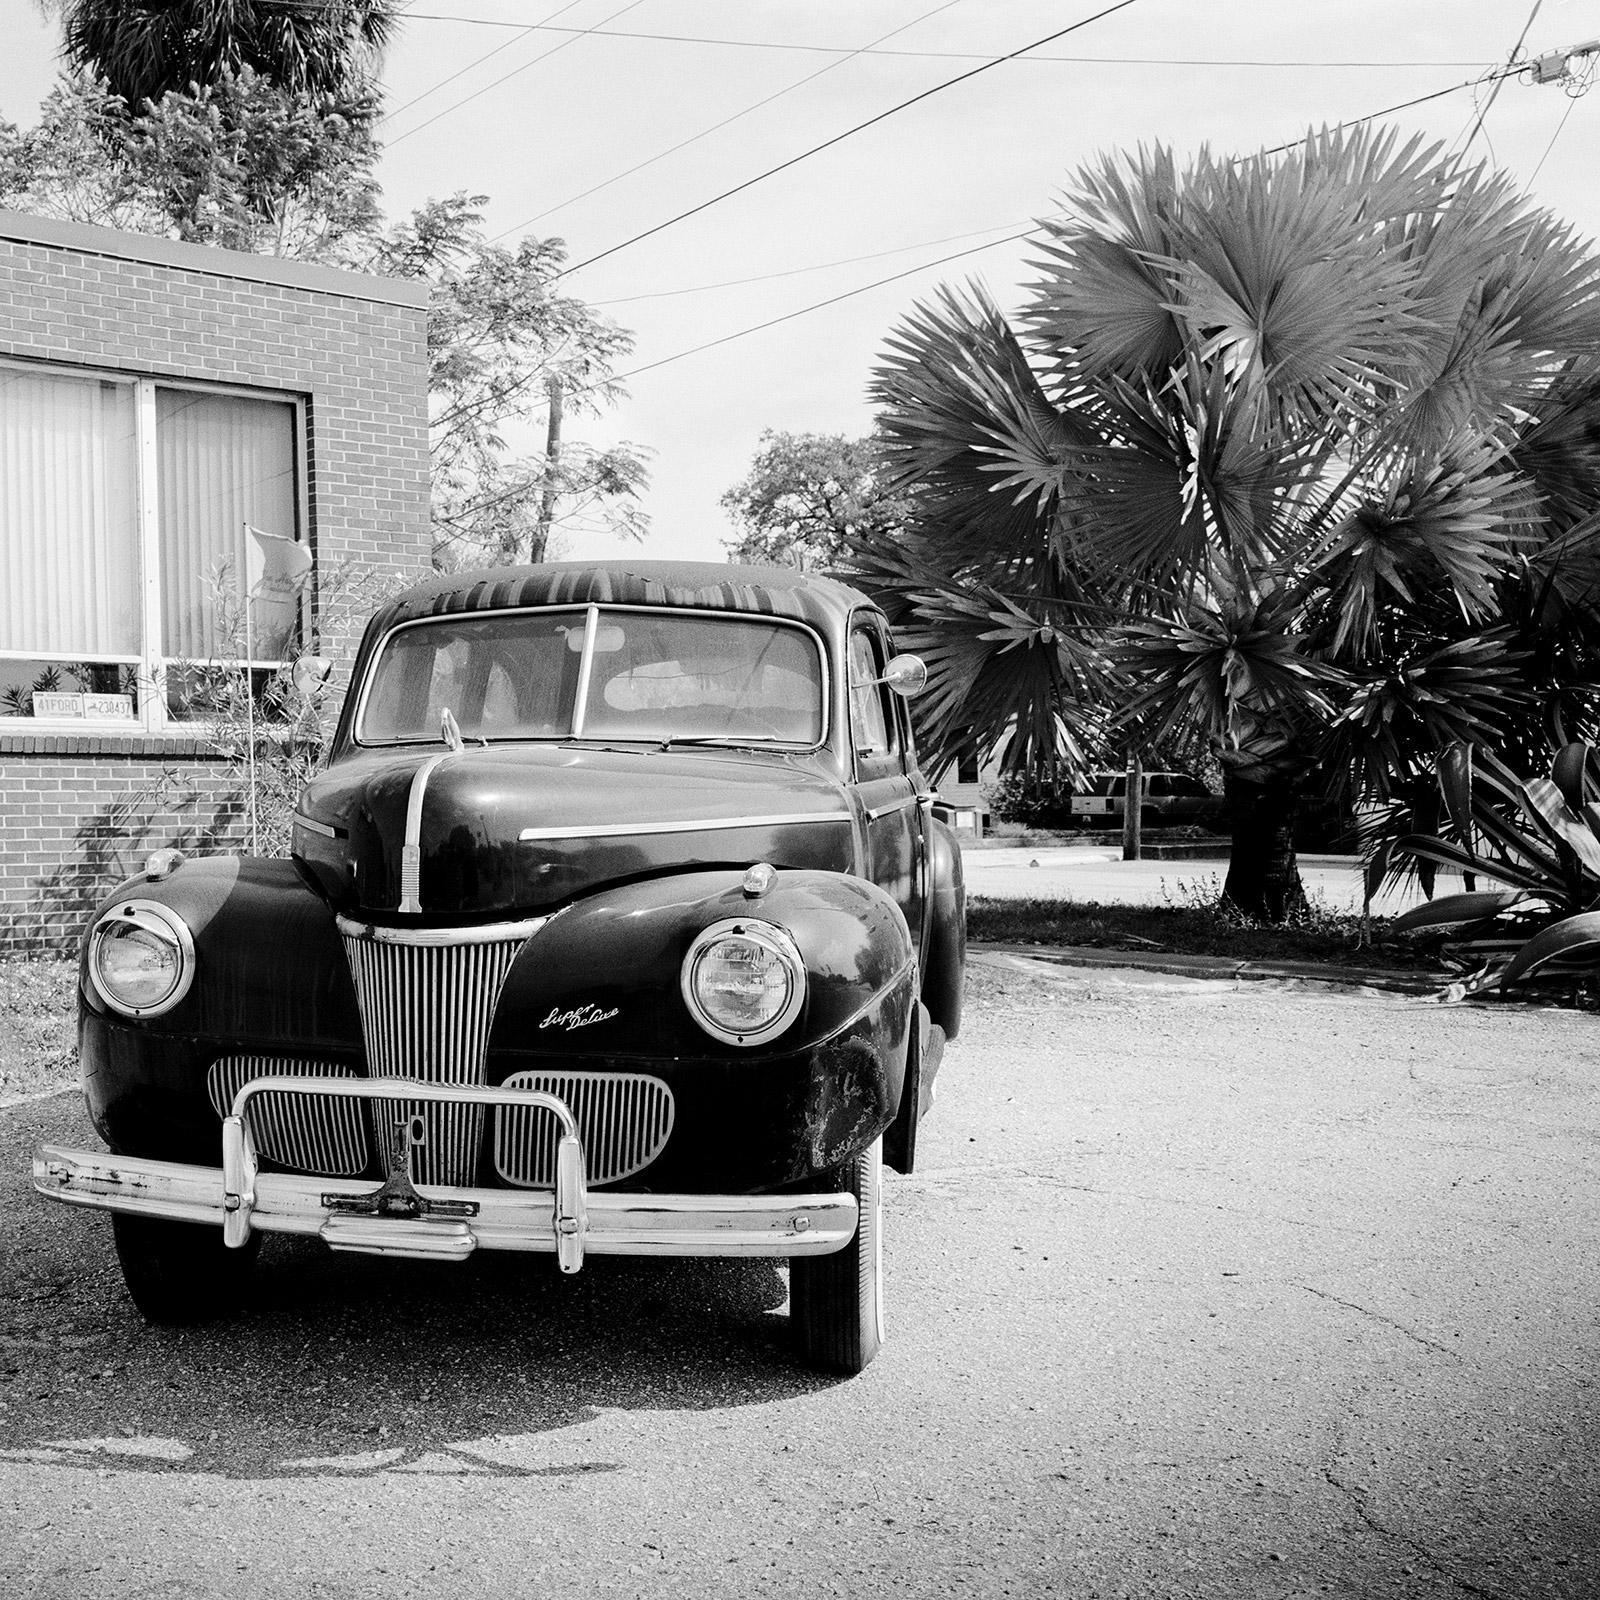 Gerald Berghammer Black and White Photograph - 1941 Ford Super Deluxe Business Coupe, USA, black & white photography, landscape